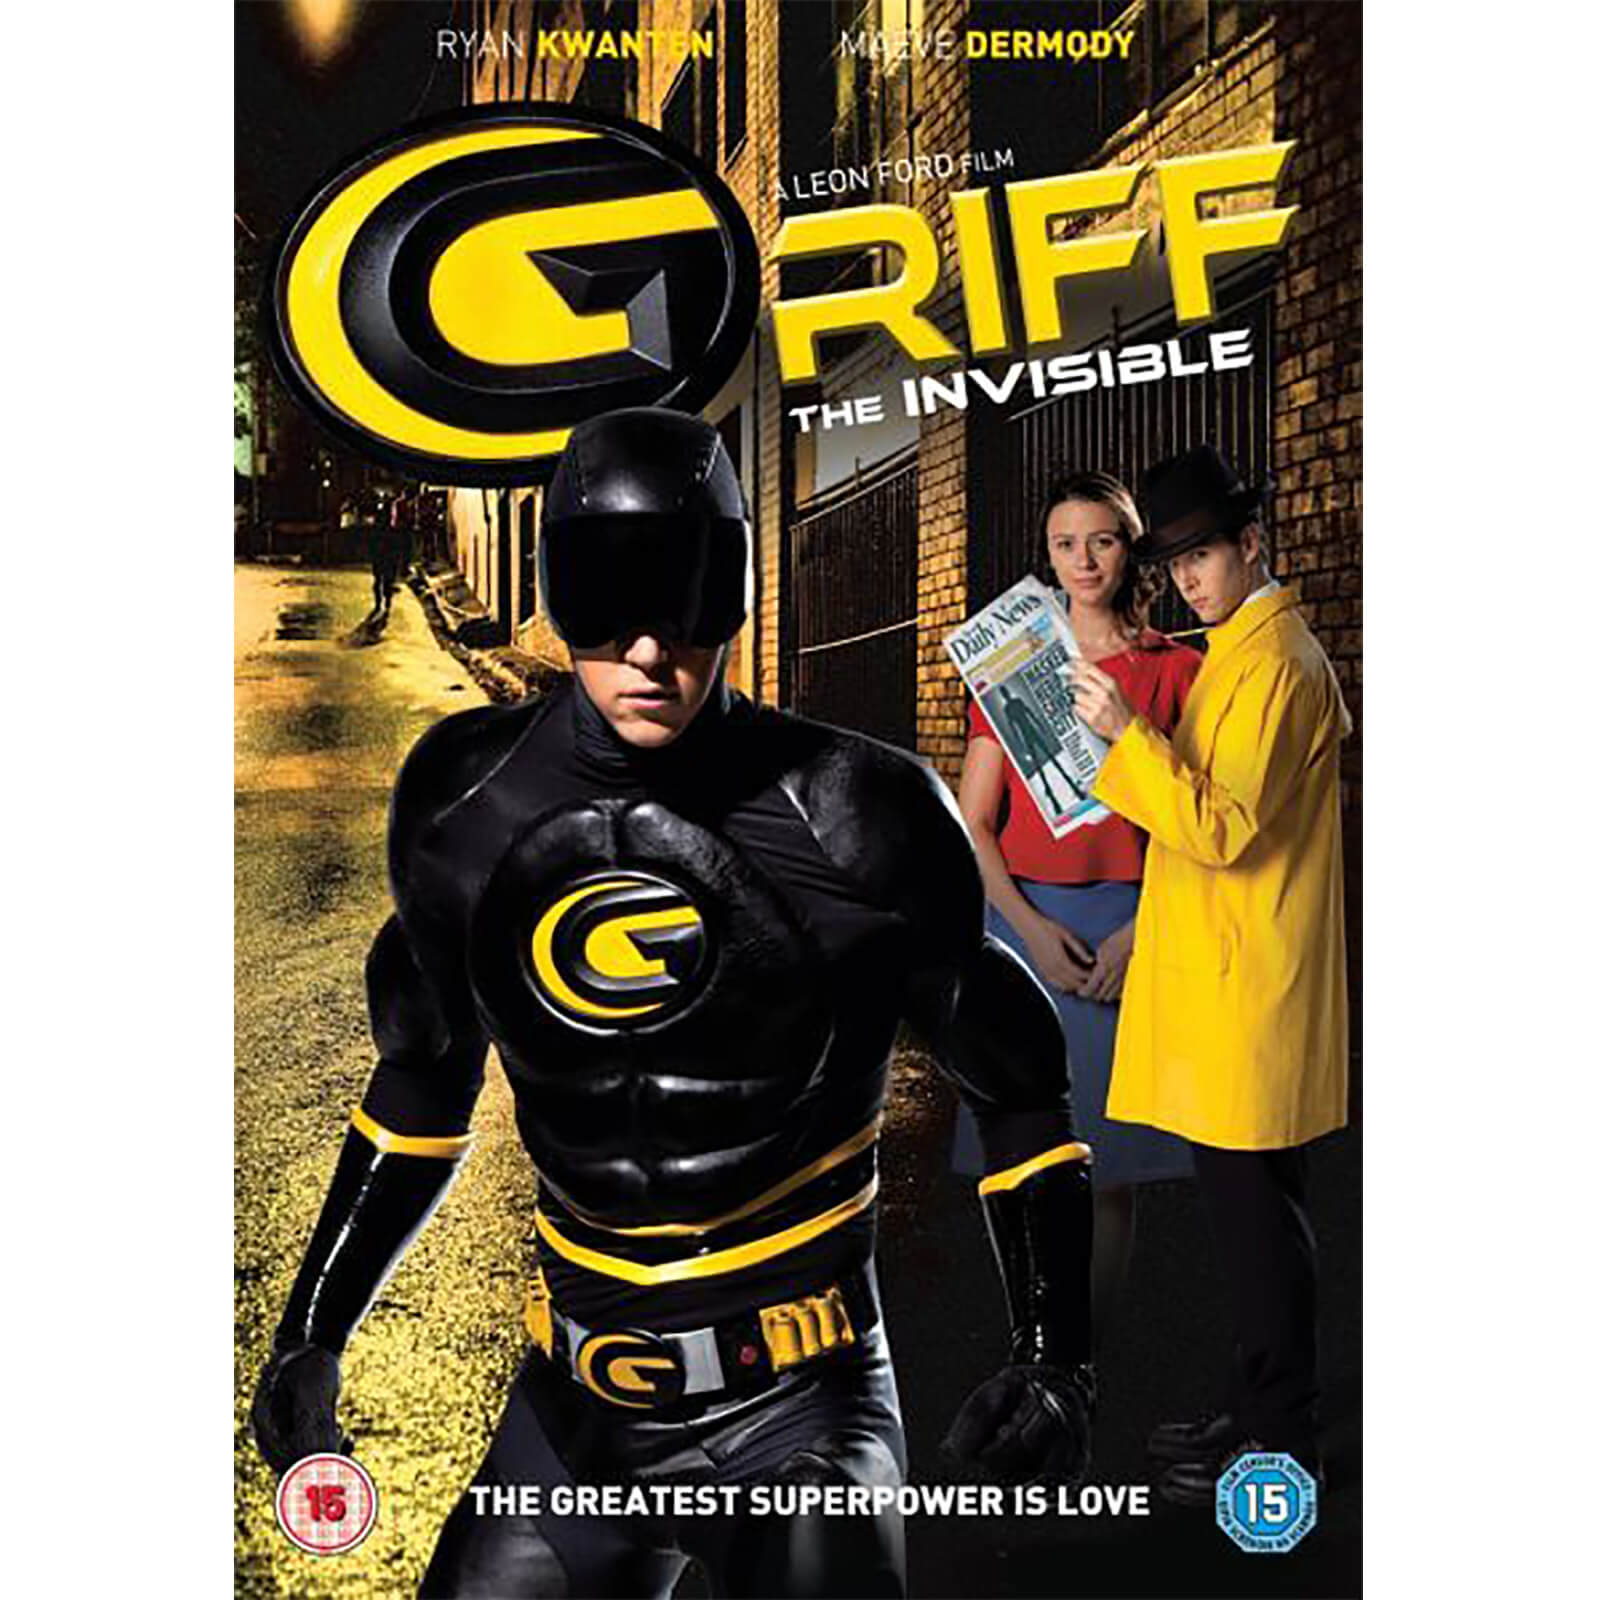 matchbox films griff the invisible